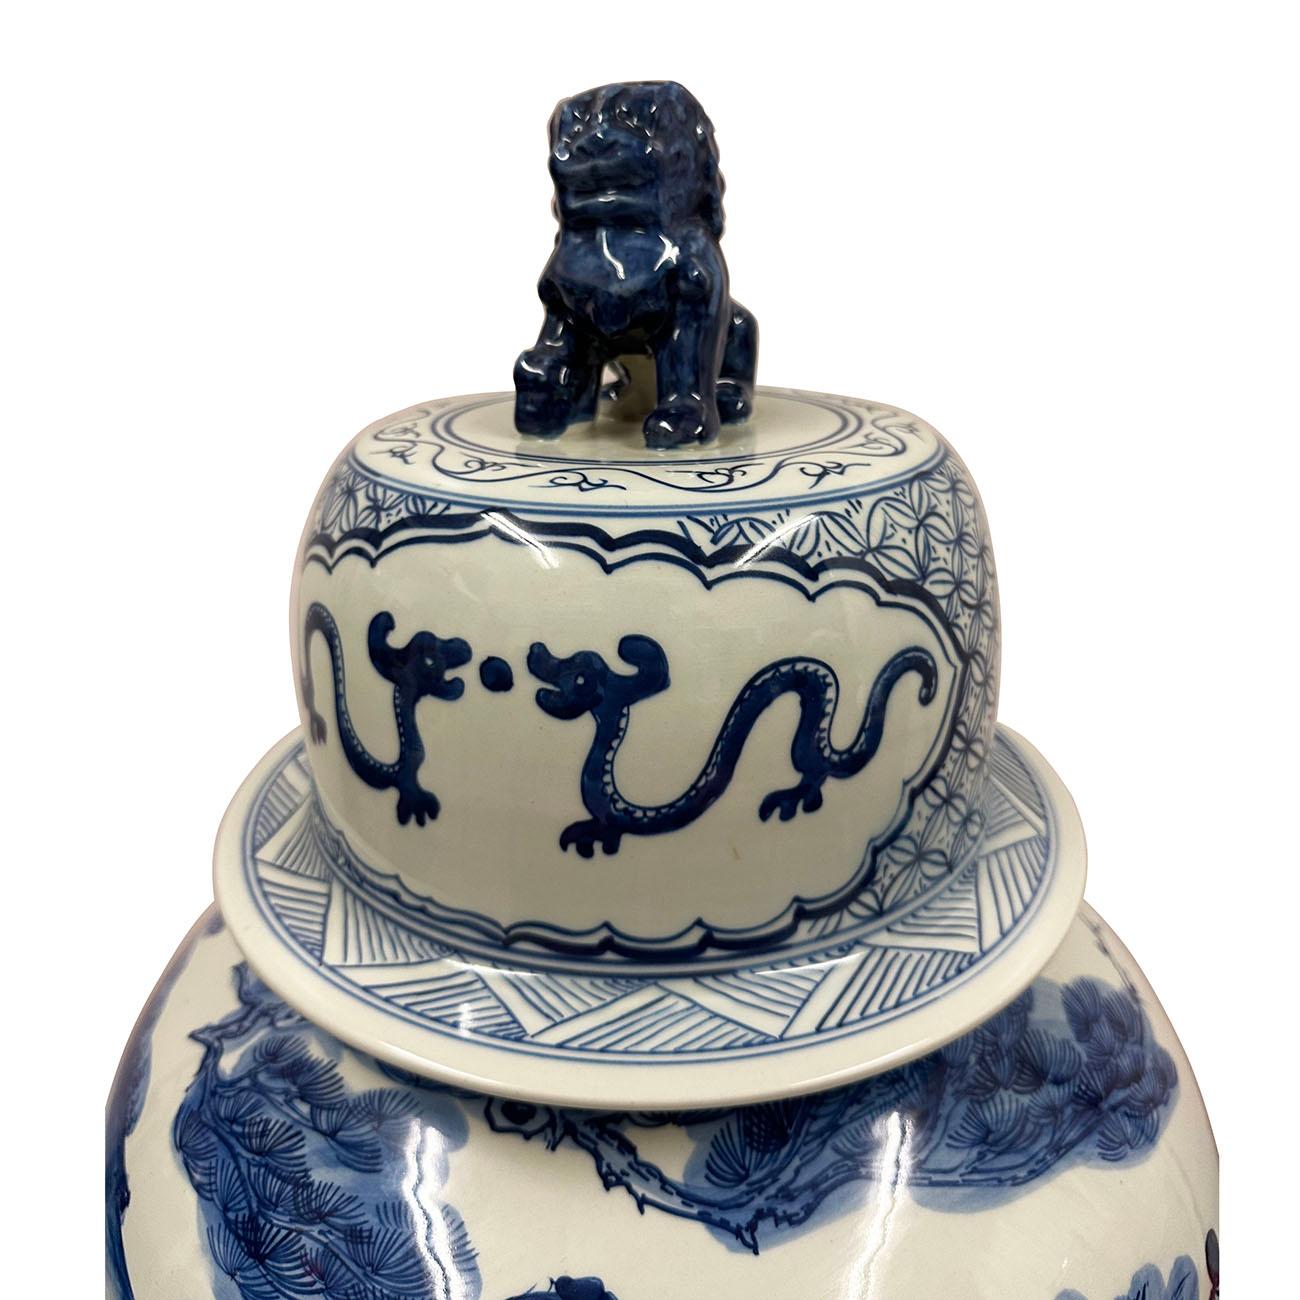 This magnificent Chinese Antique Blue and White porcelain Ginger Jar was hand made and hand paint from famous Chinese Blue and White Porcelain. It is a painting by Youqiu from the Ming Dynasty and is now collected in the Xiamen Museum. The Eight